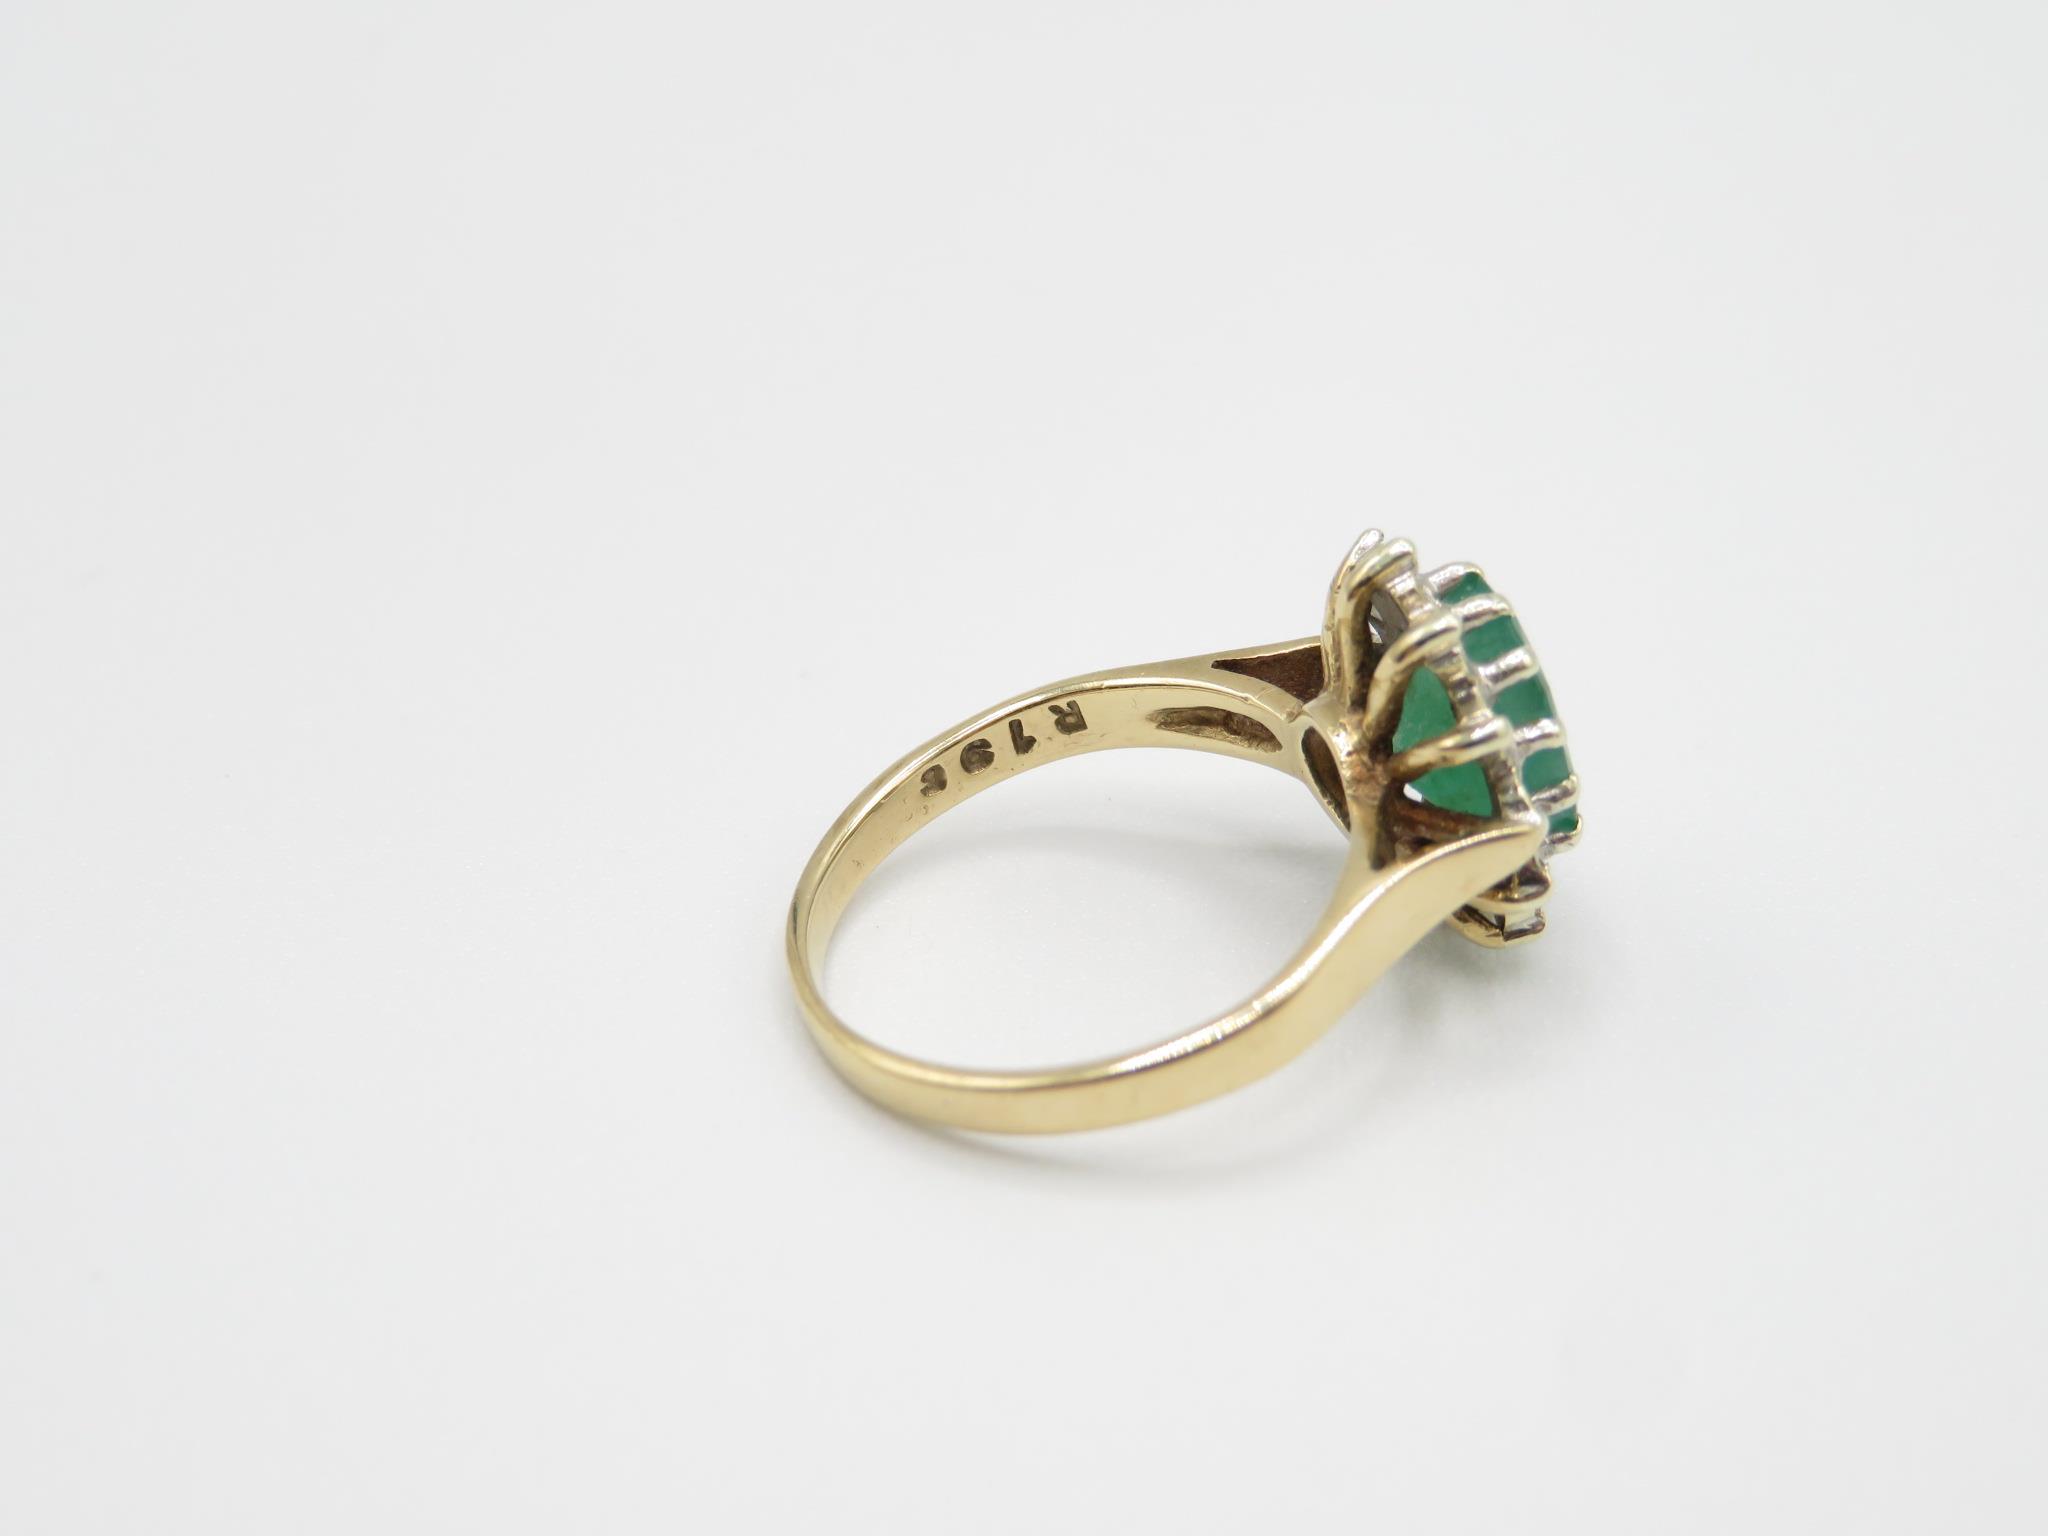 9ct Gold Oval Cut Emerald Single Stone Ring With Diamond Surround (3.2g) Size M - Image 5 of 8